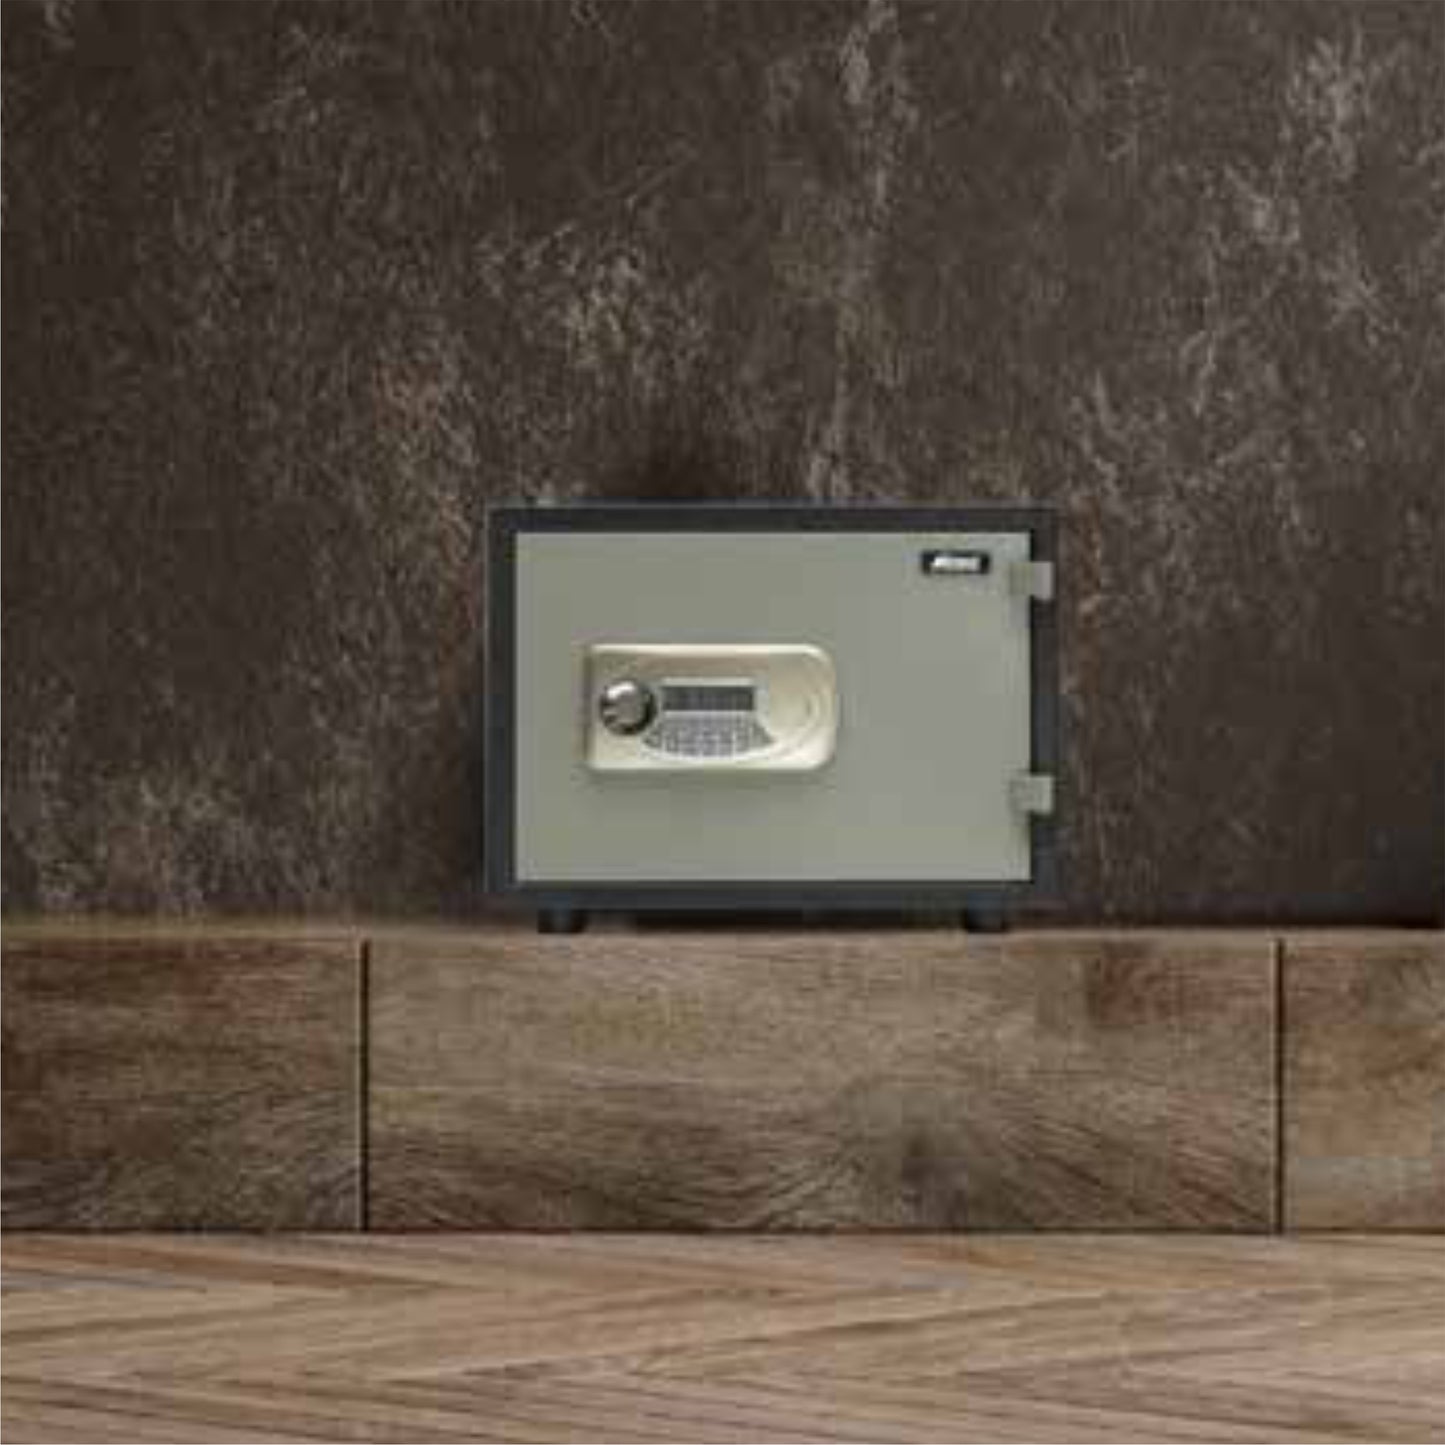 Ozone Fire-resistant Safe for Homes & Offices | 2-way Access | Password & Emergency Key (19 Ltrs.)